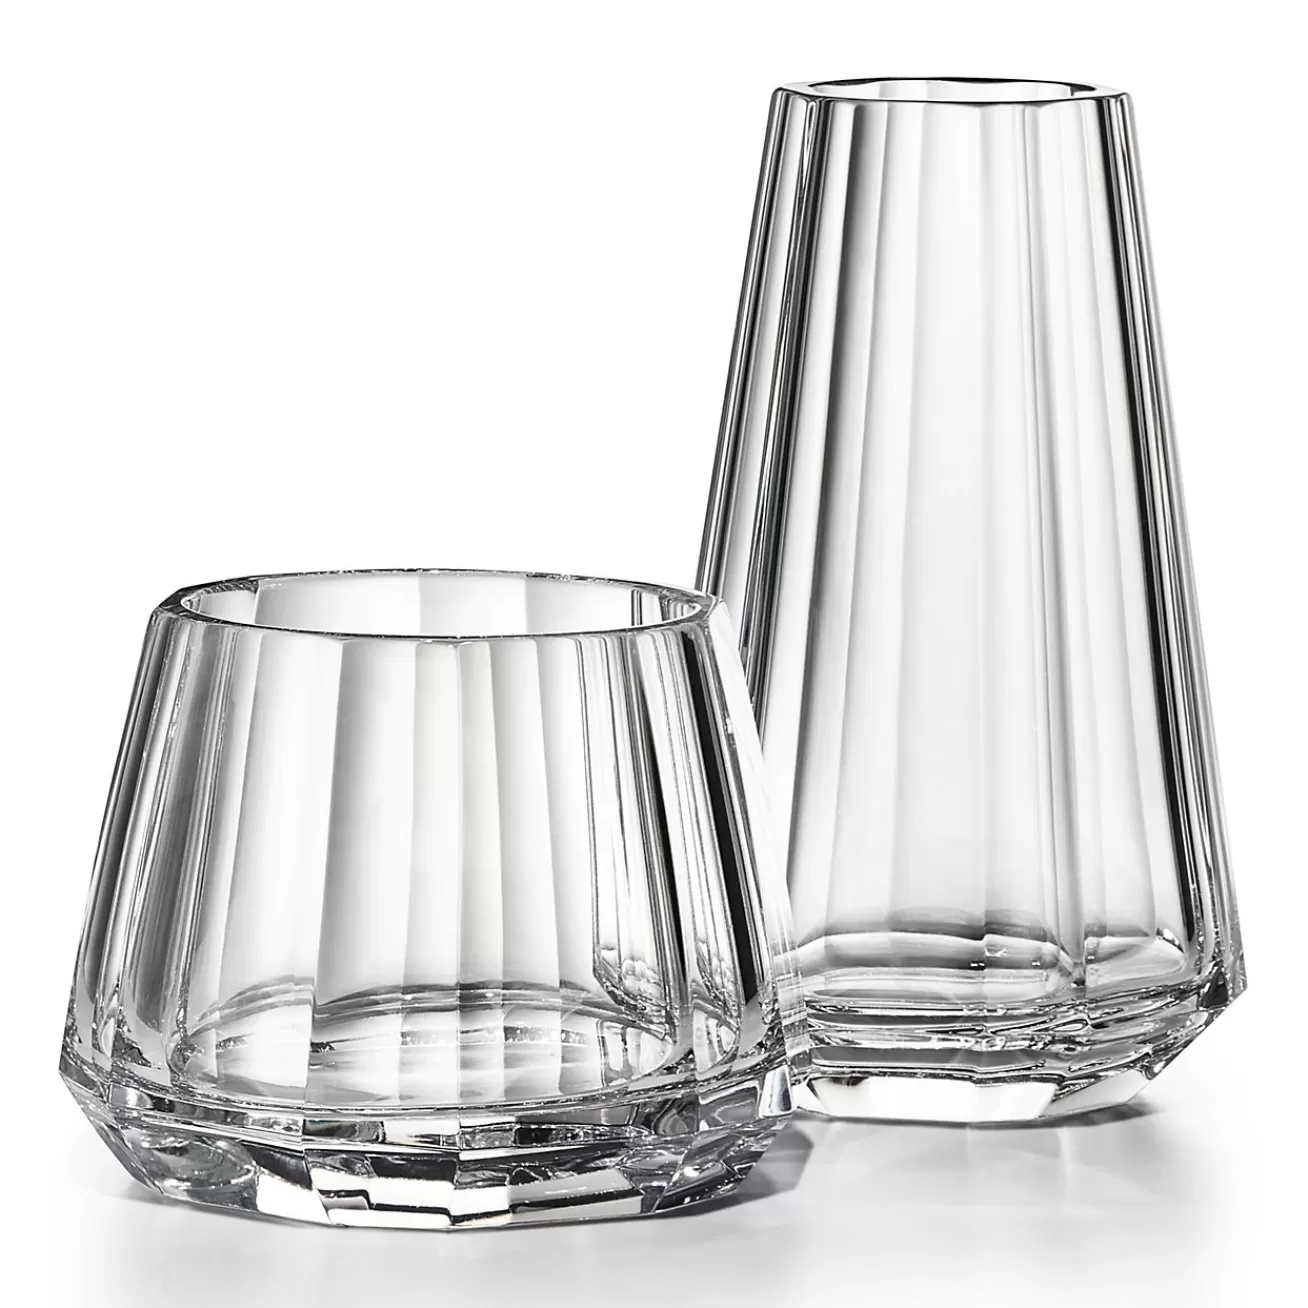 Tiffany & Co. Tiffany Facets Large Tapered Vase in Lead Crystal Glass | ^ The Home | Housewarming Gifts